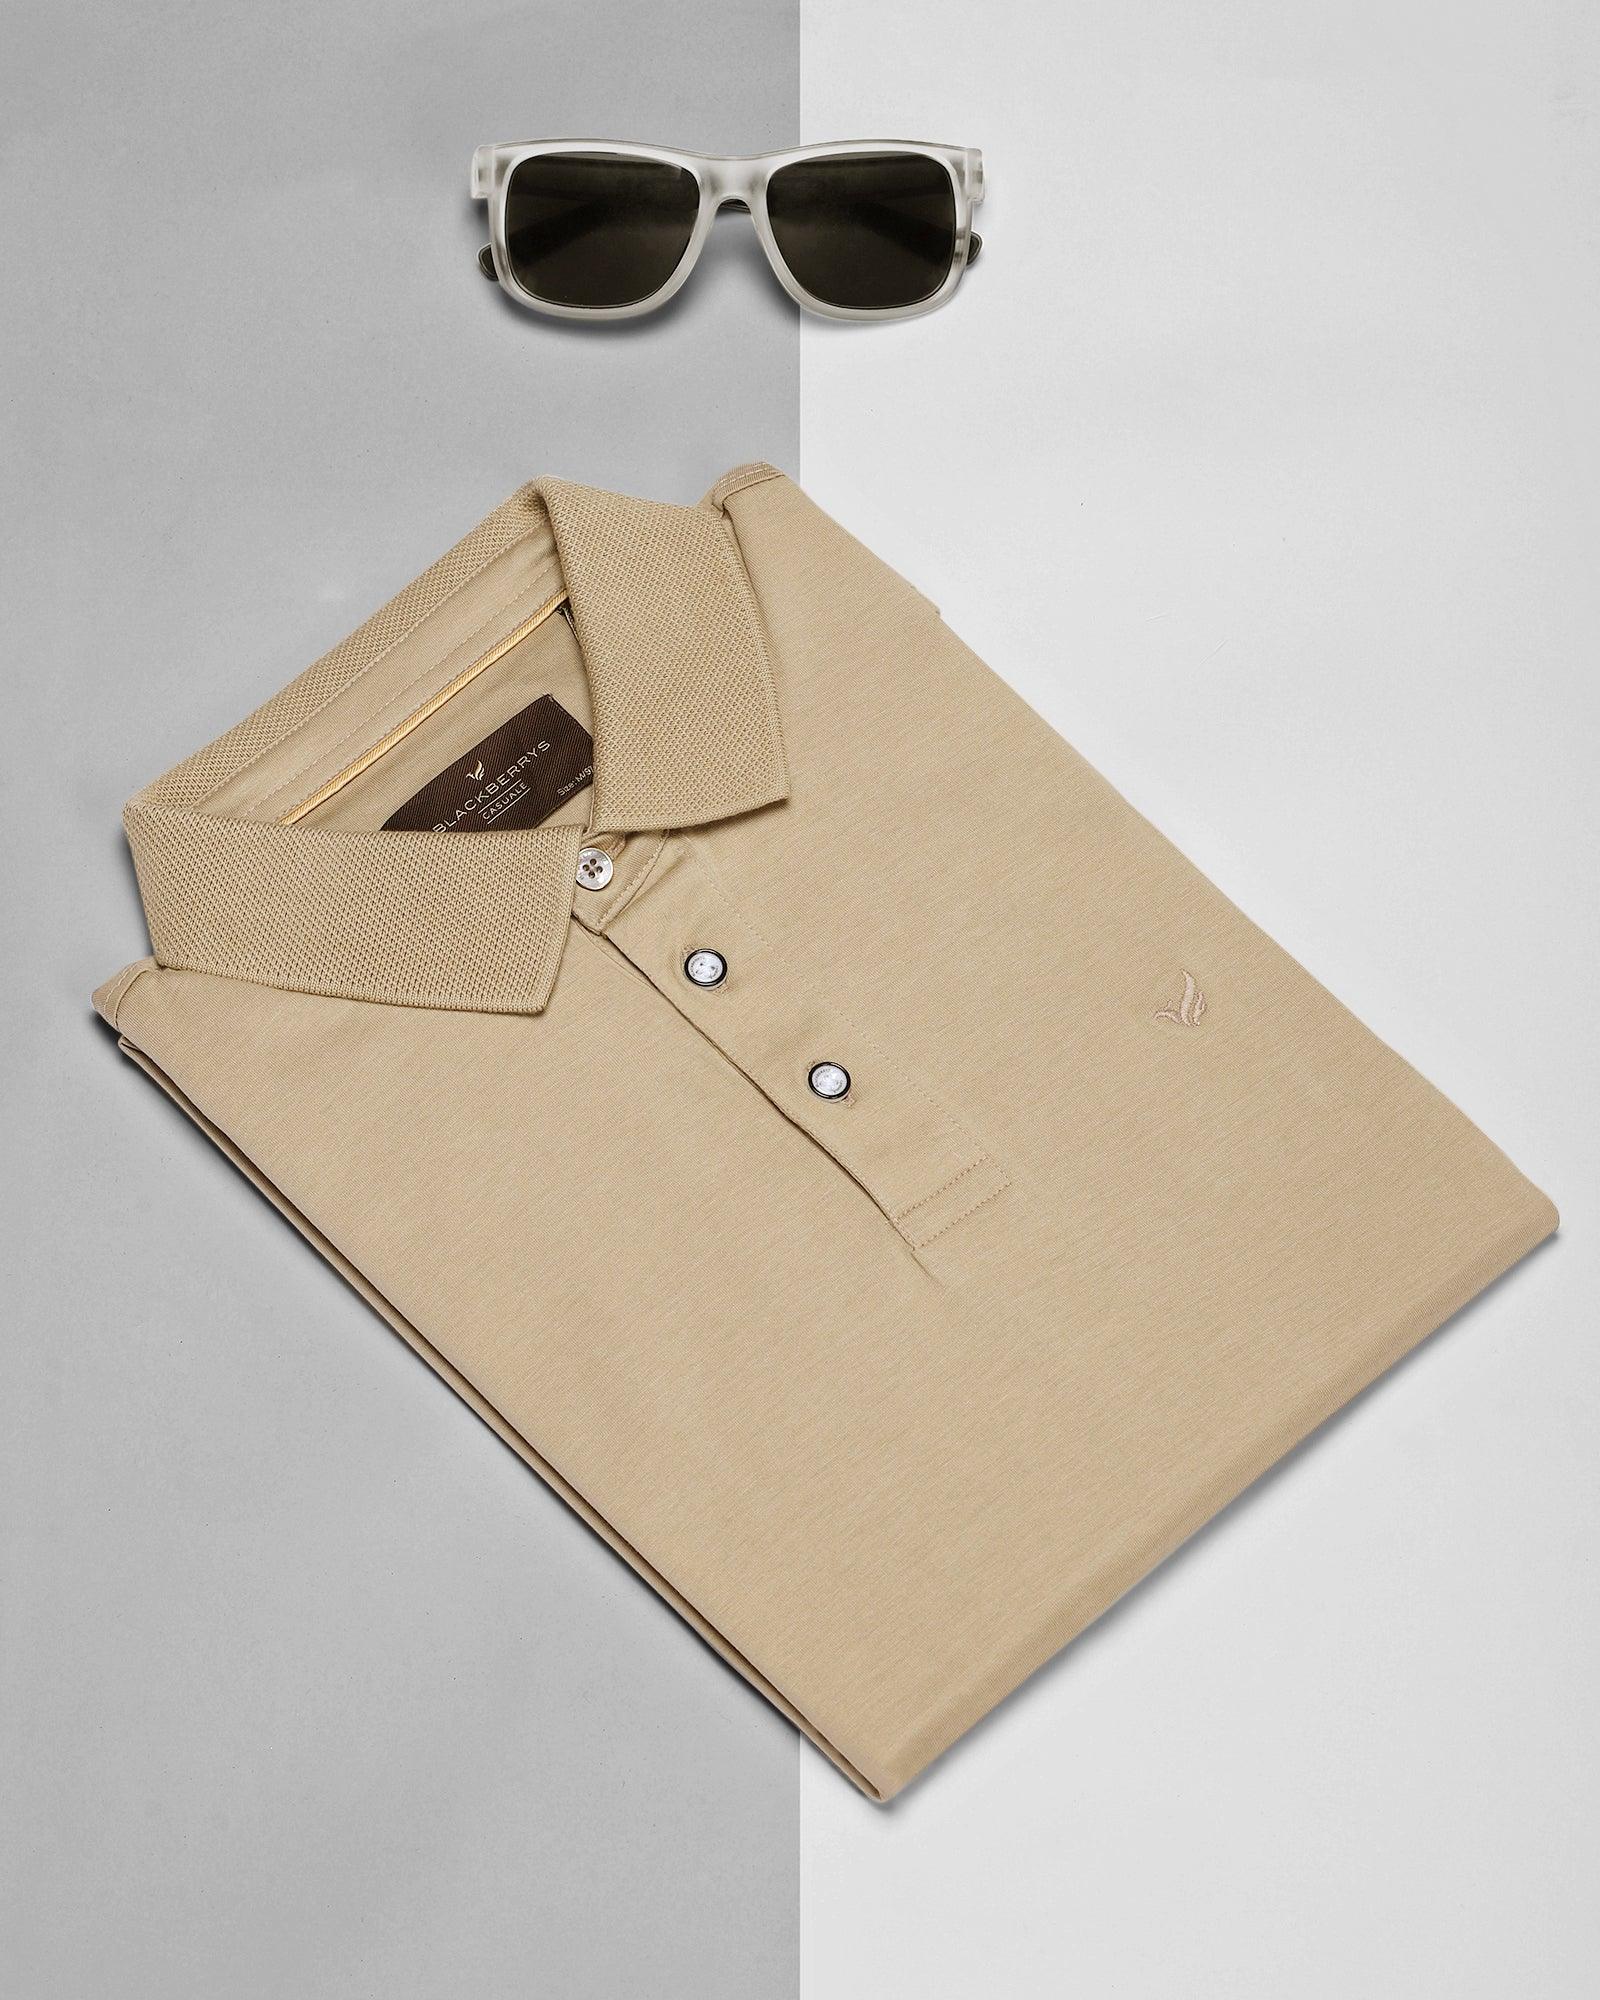 Polo Beige Solid T Shirt - David